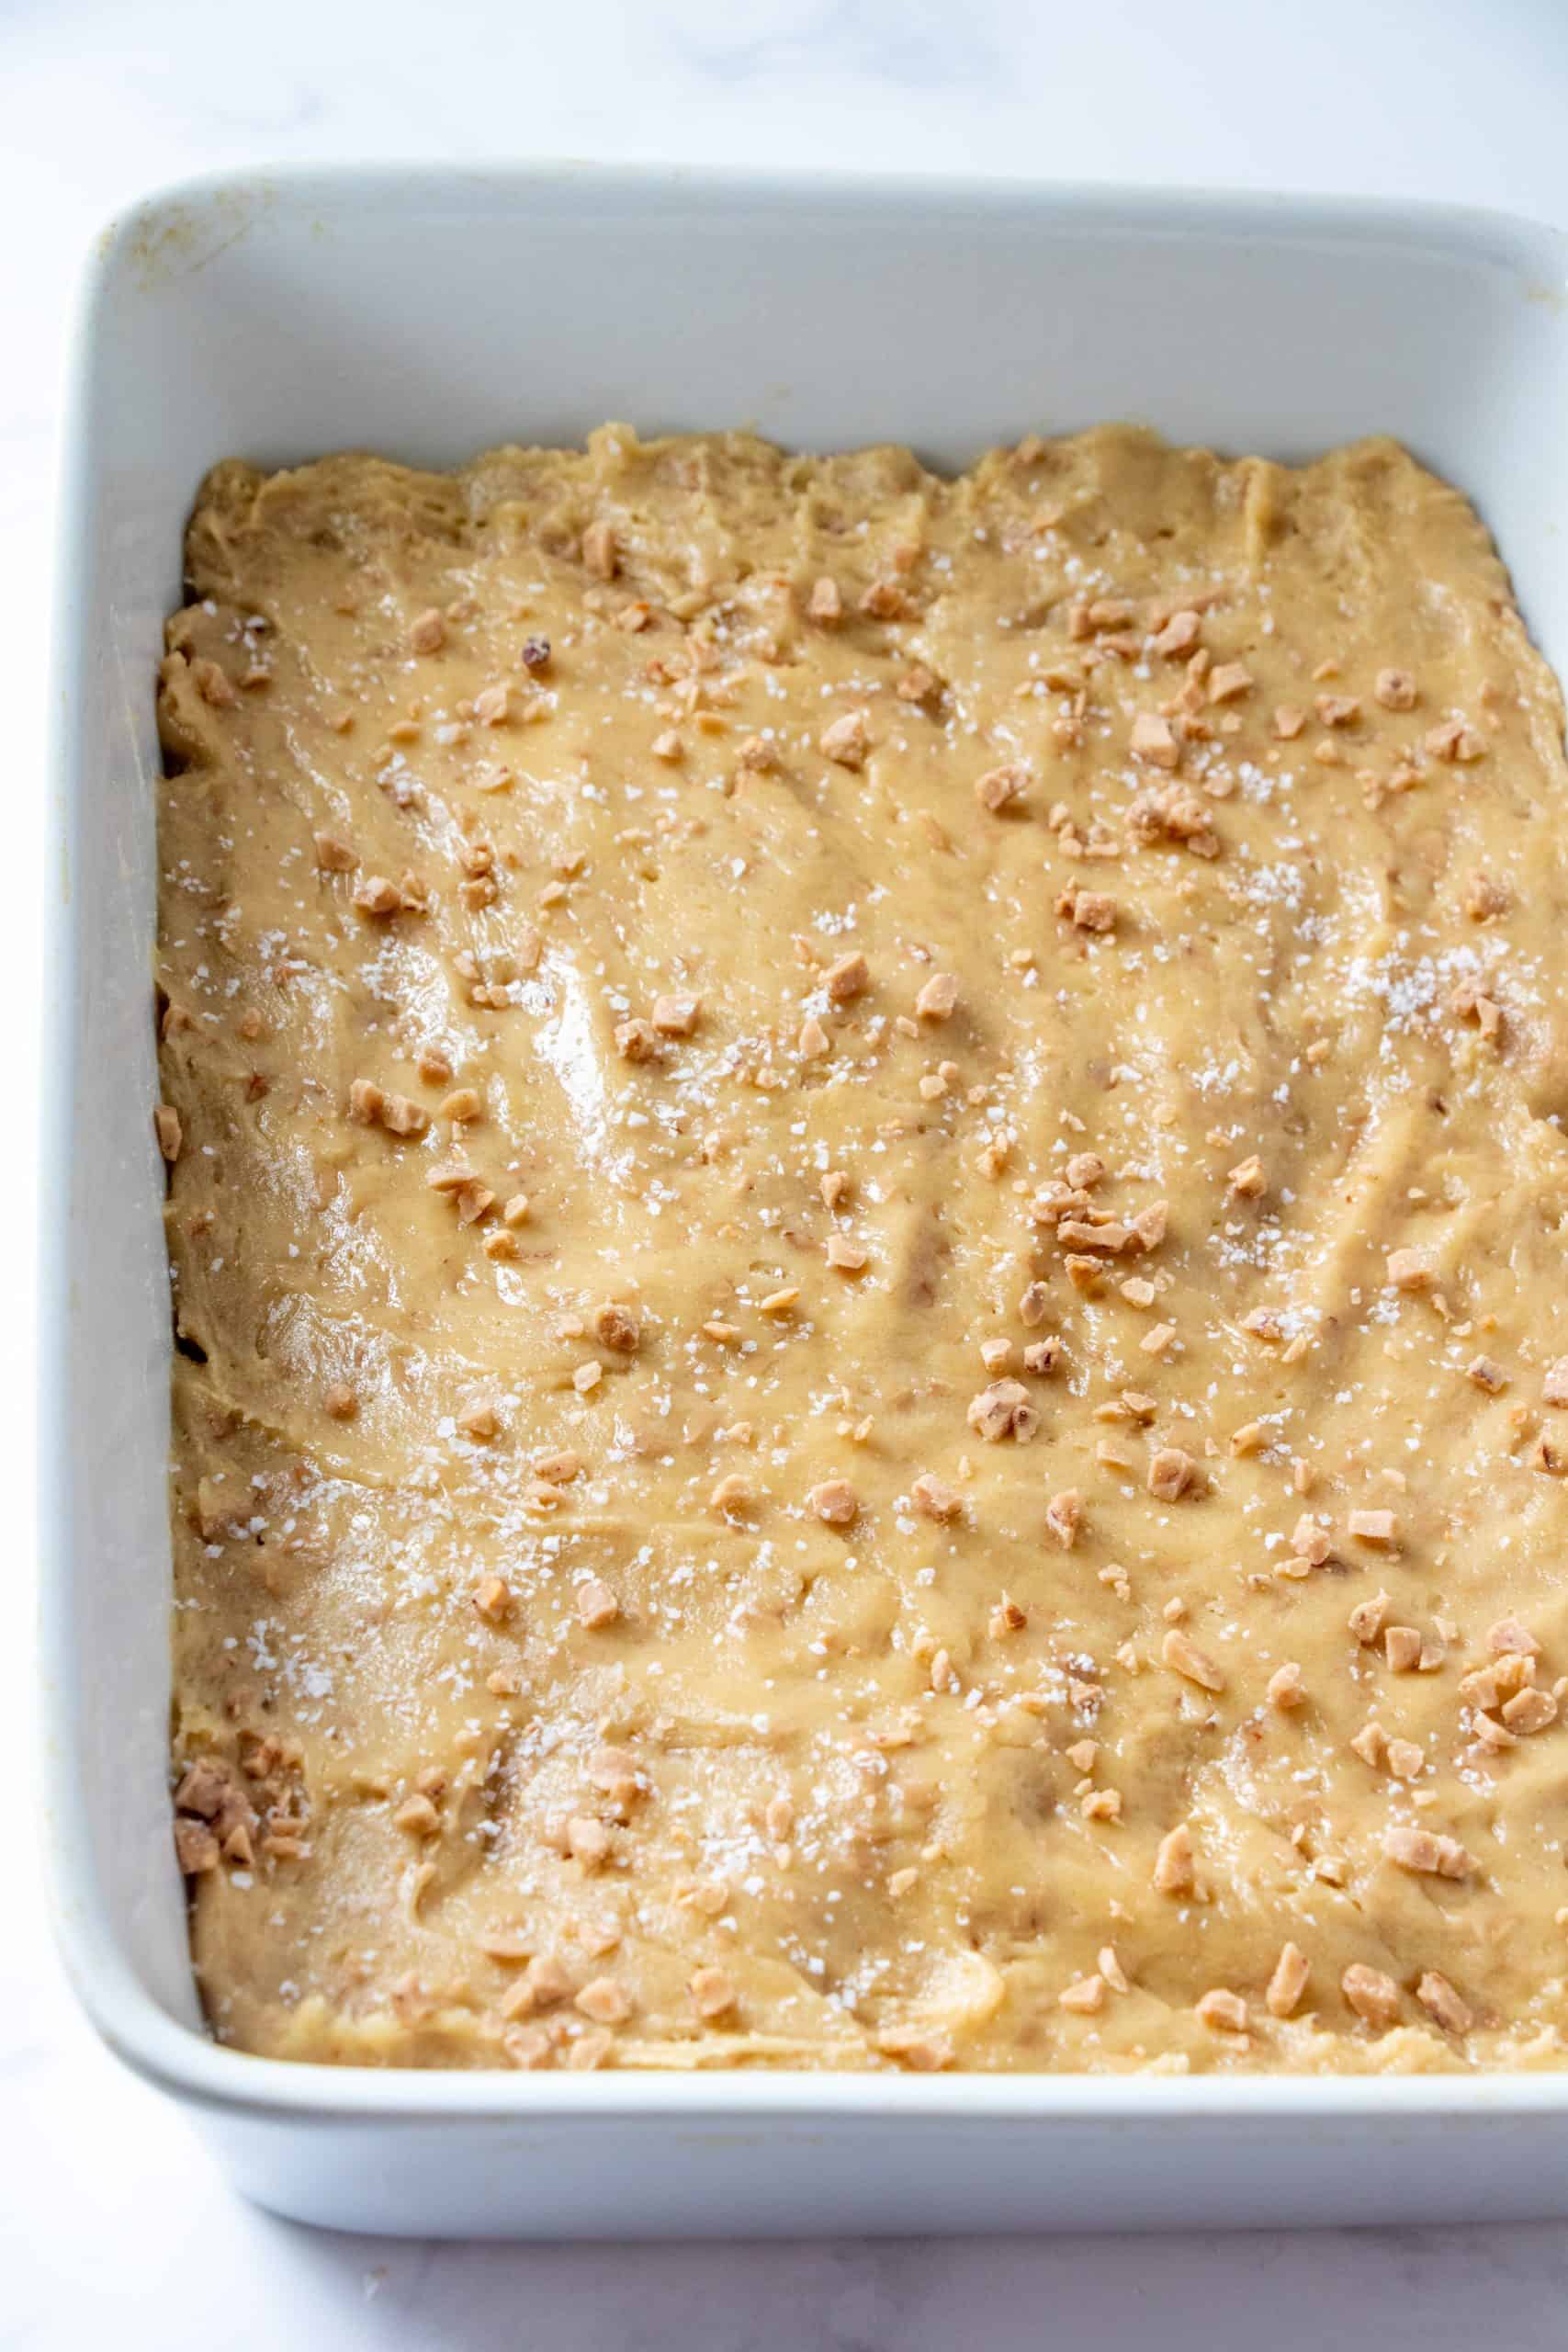 blondie batter spread out evenly into white baking dish.